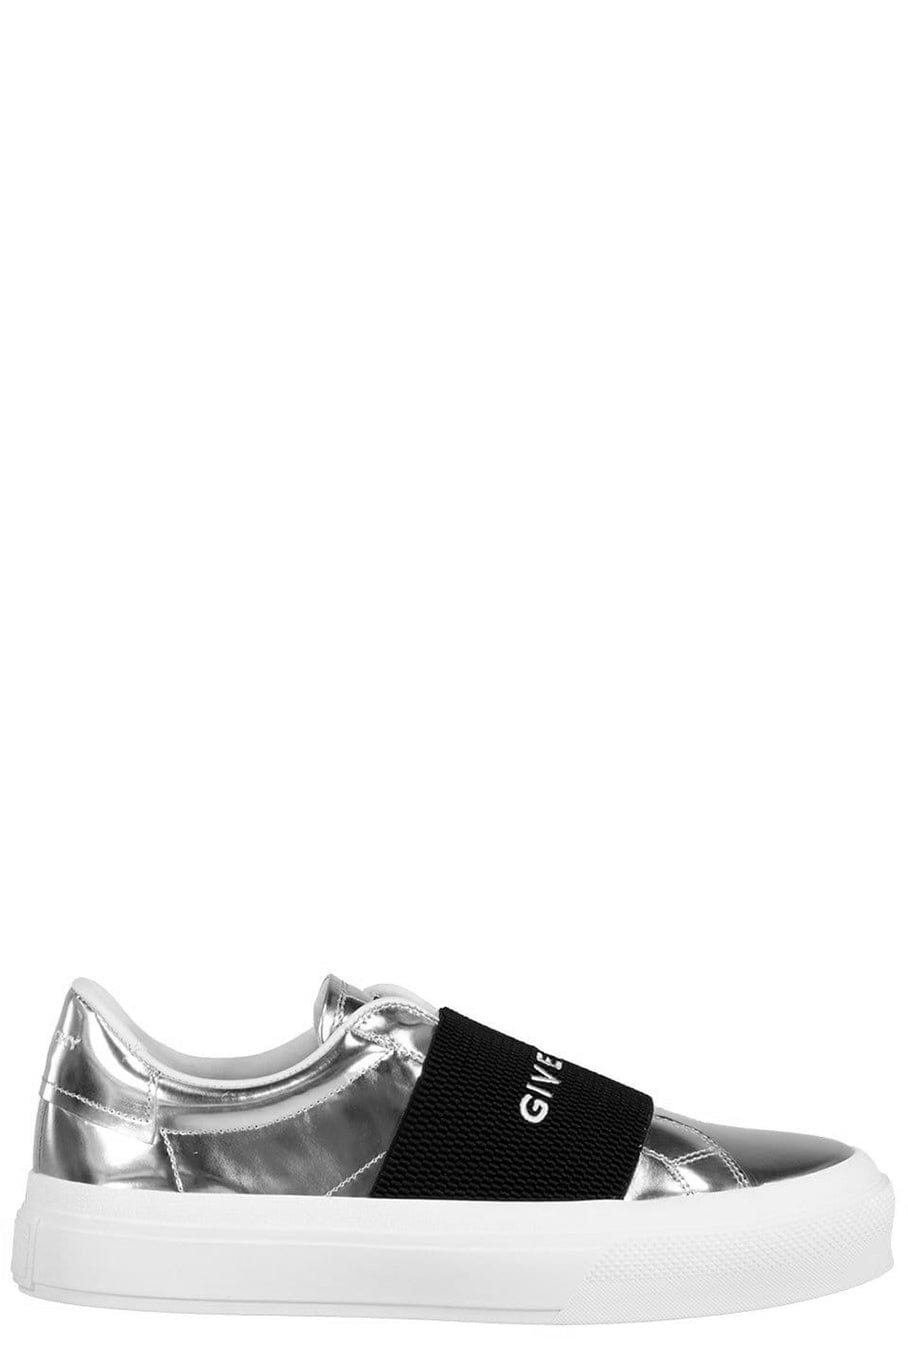 GIVENCHY-City Court Sneaker With Elastic-